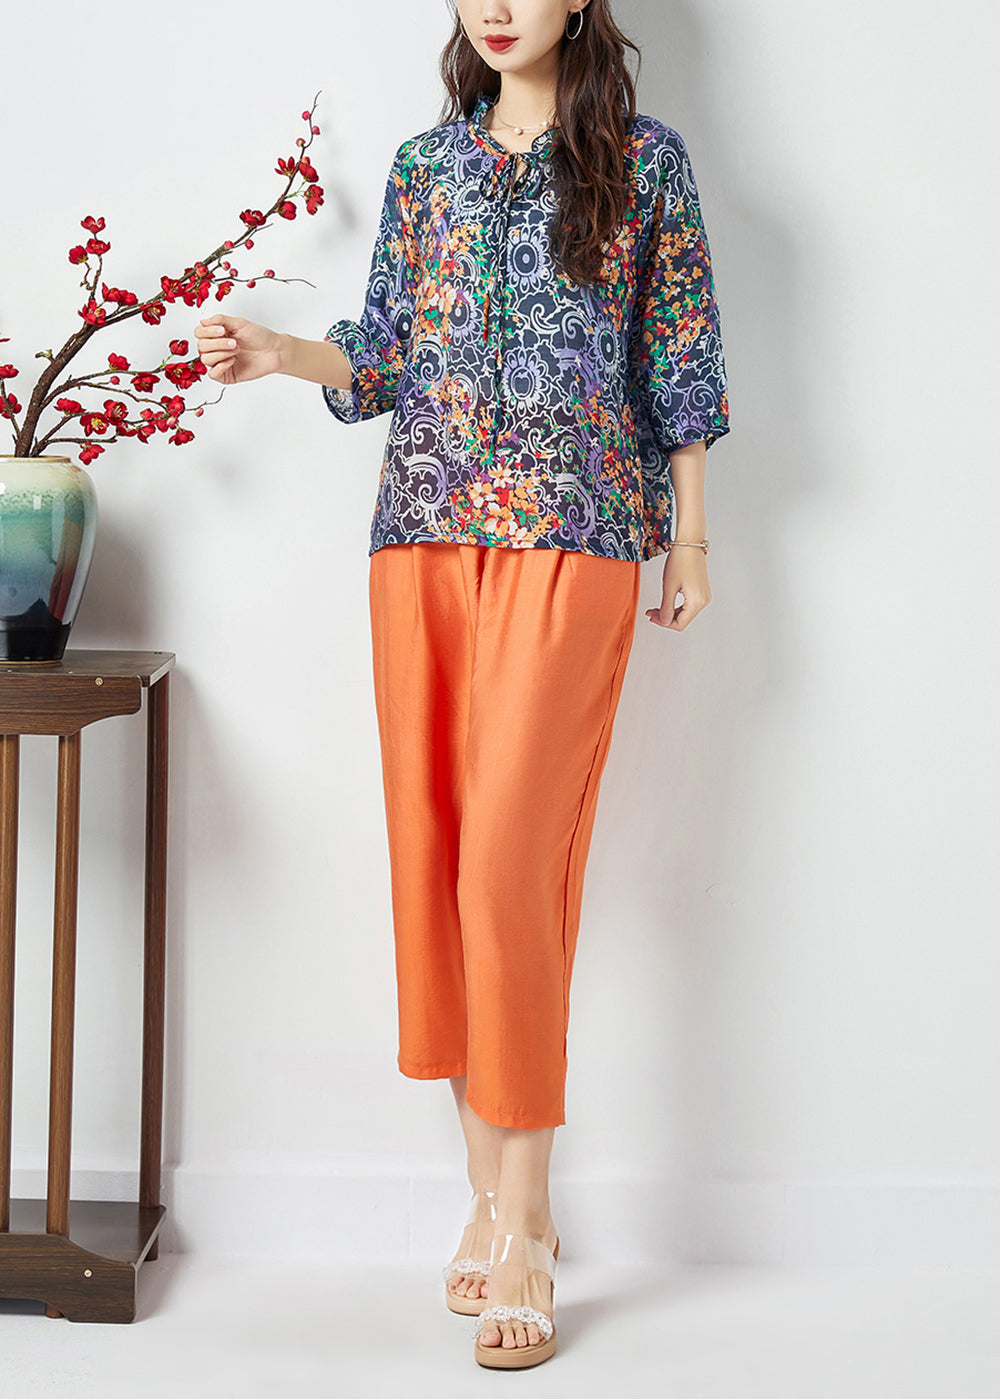 Women Ruffled Lace Up Print Cotton Tops And Pants Two Pieces Set Summer LC0401 - fabuloryshop